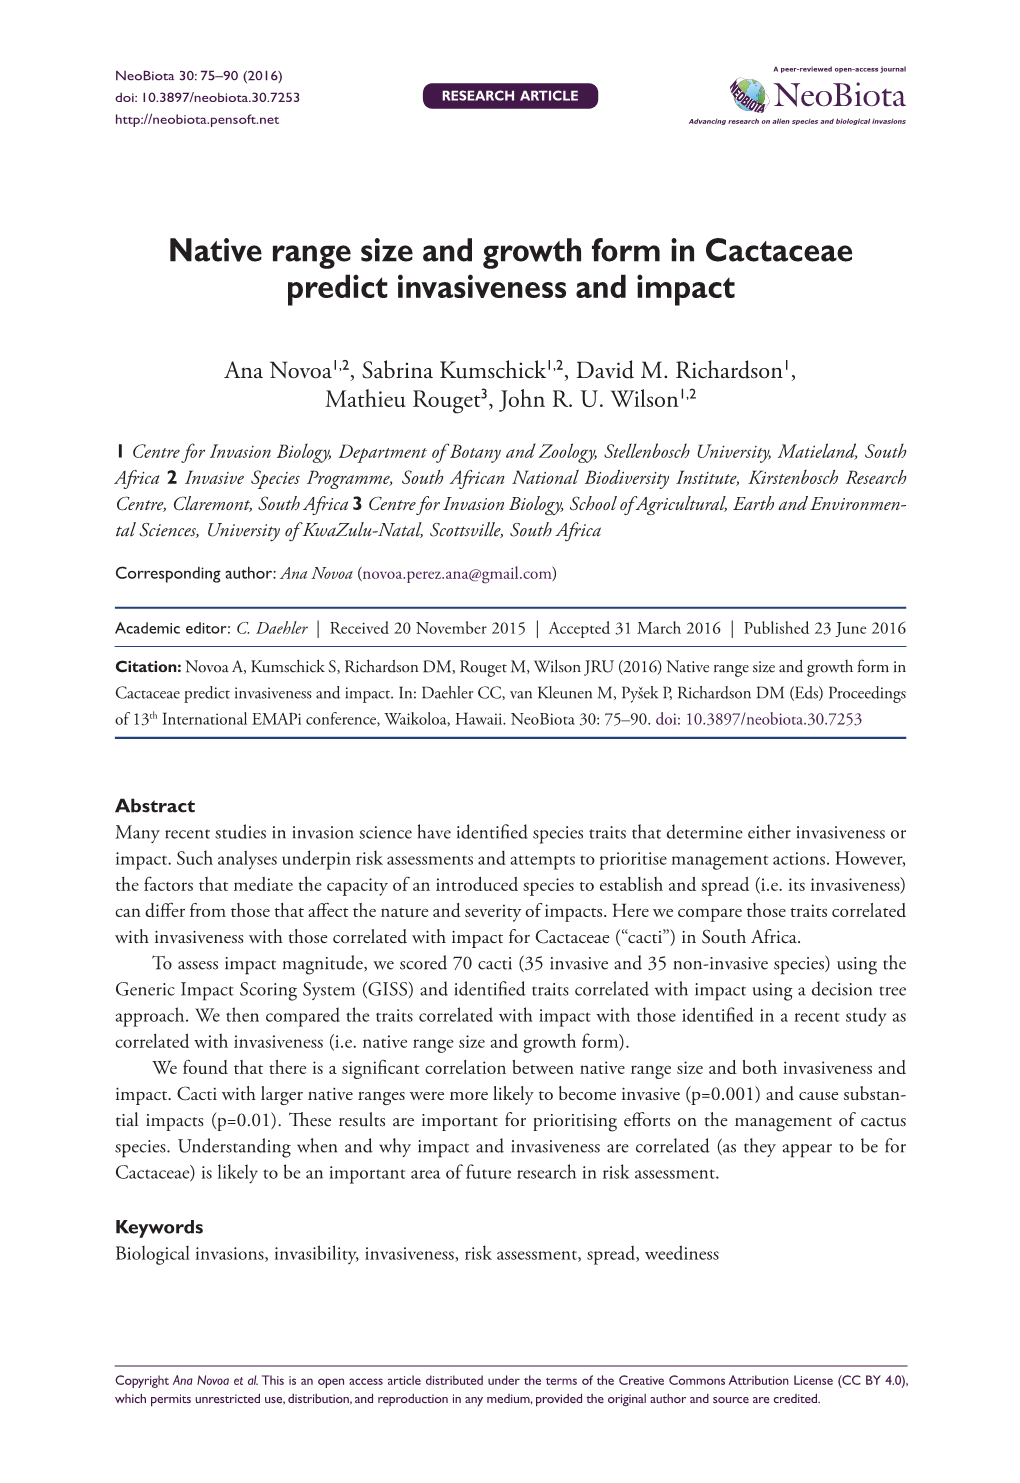 Native Range Size and Growth Form in Cactaceae Predict Invasiveness and Impact